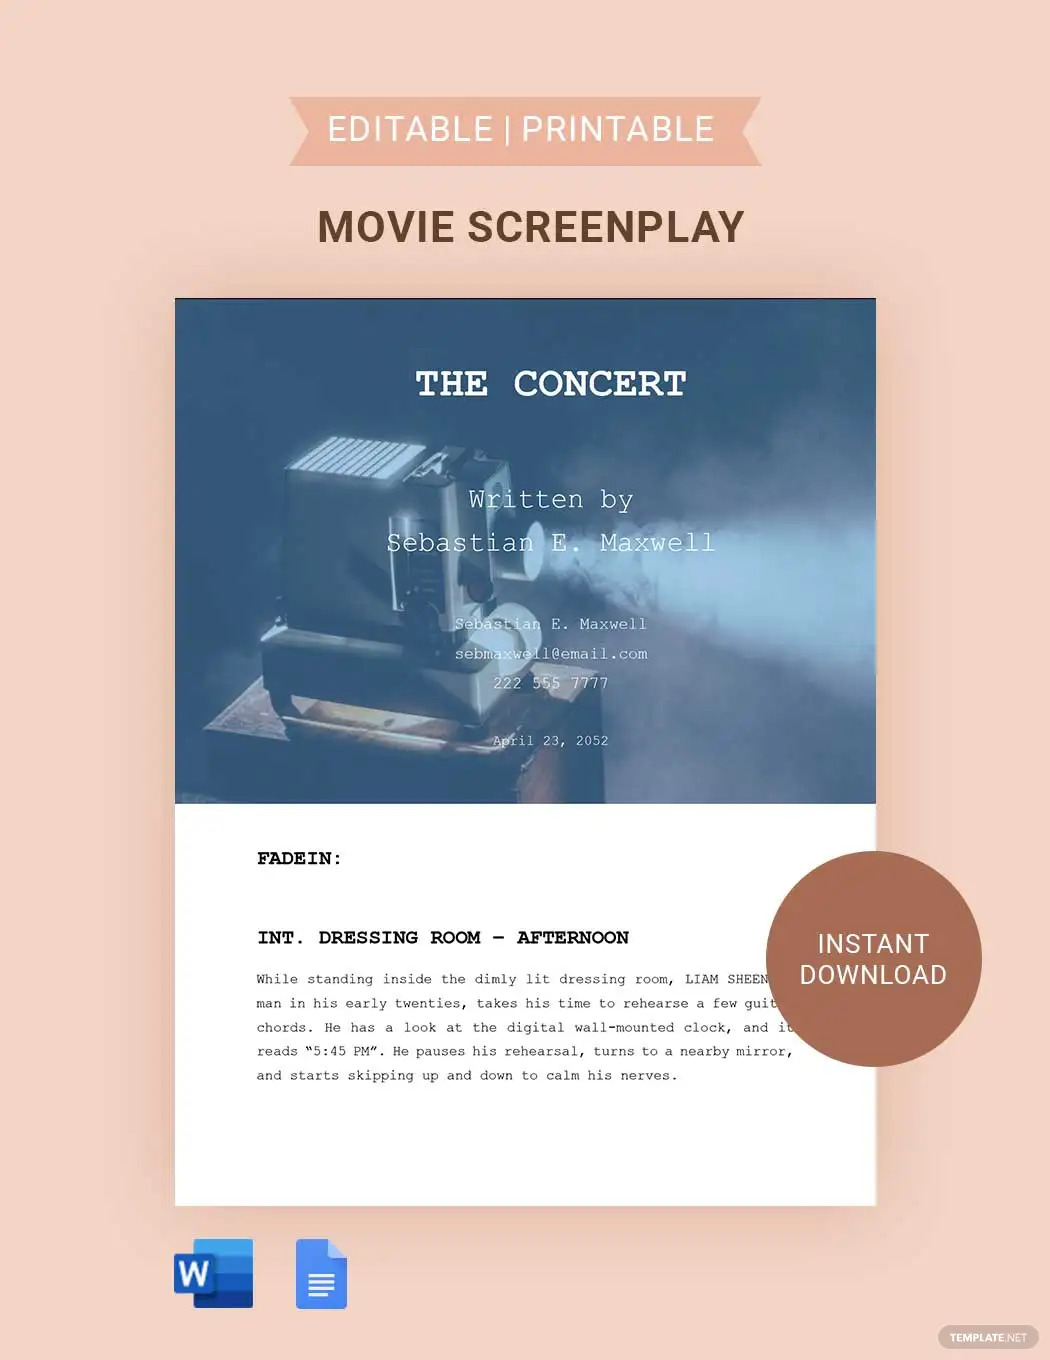 movie screenplay ideas and examples